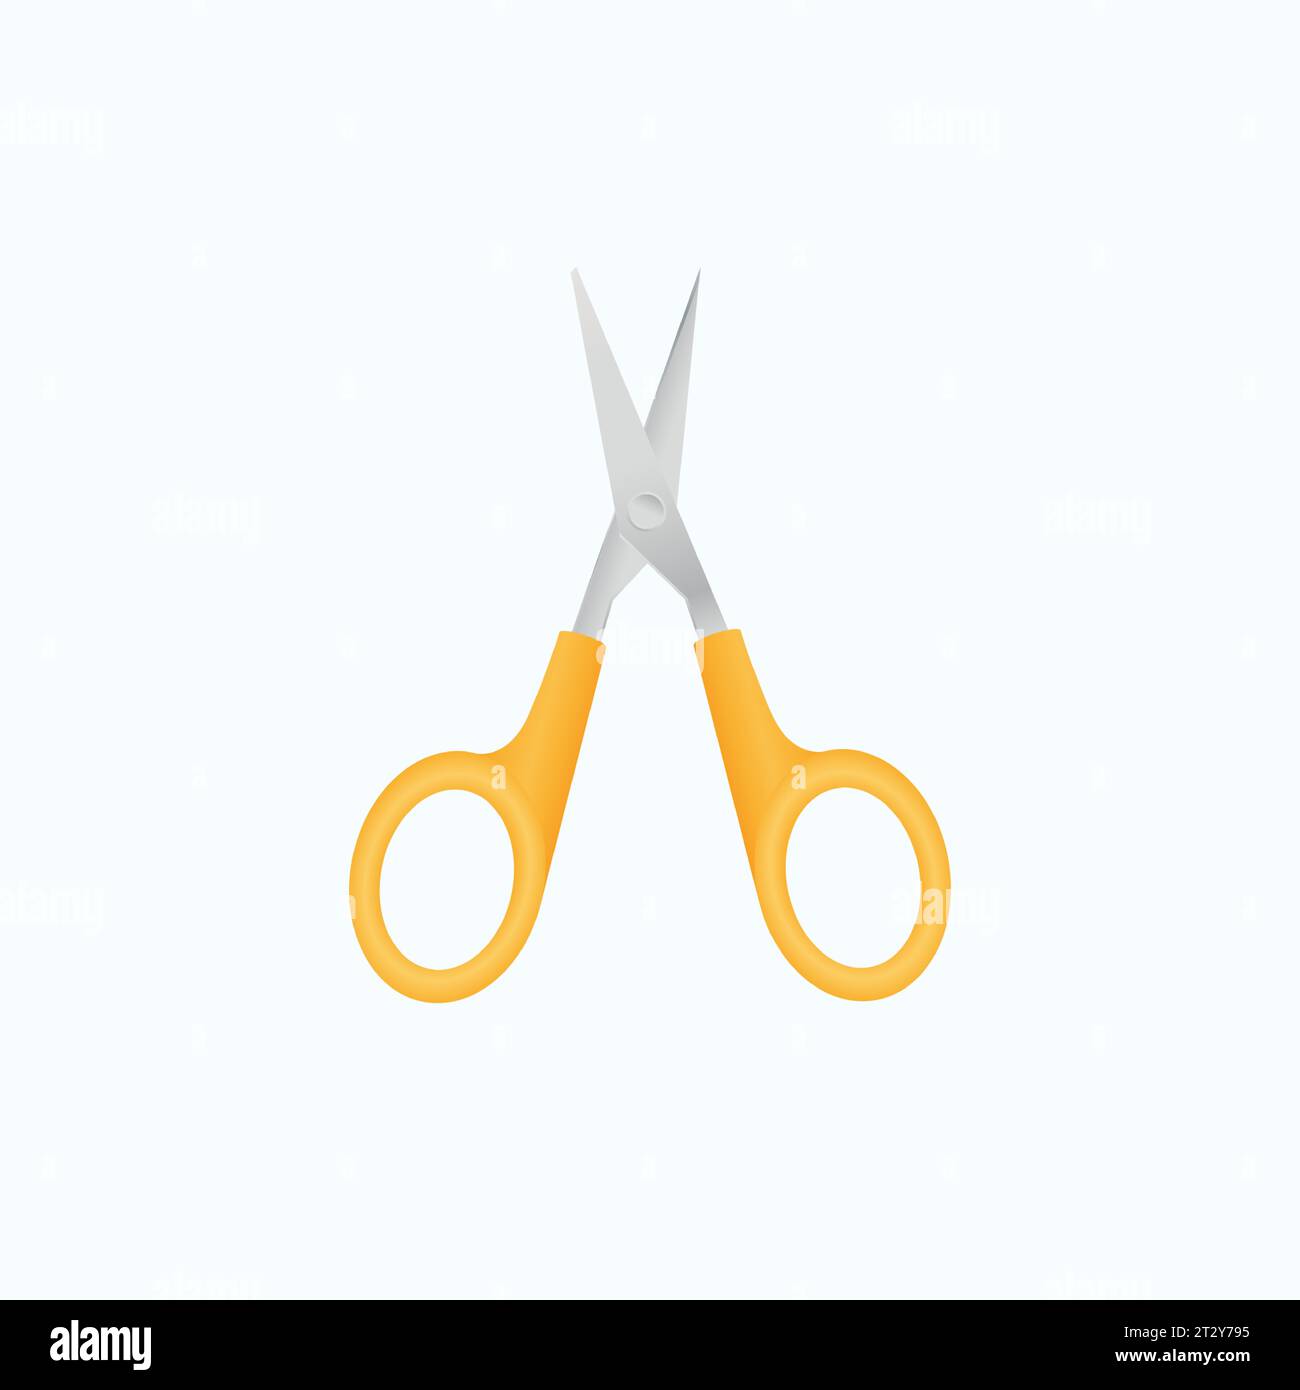 Childrens scissors Cut Out Stock Images & Pictures - Alamy